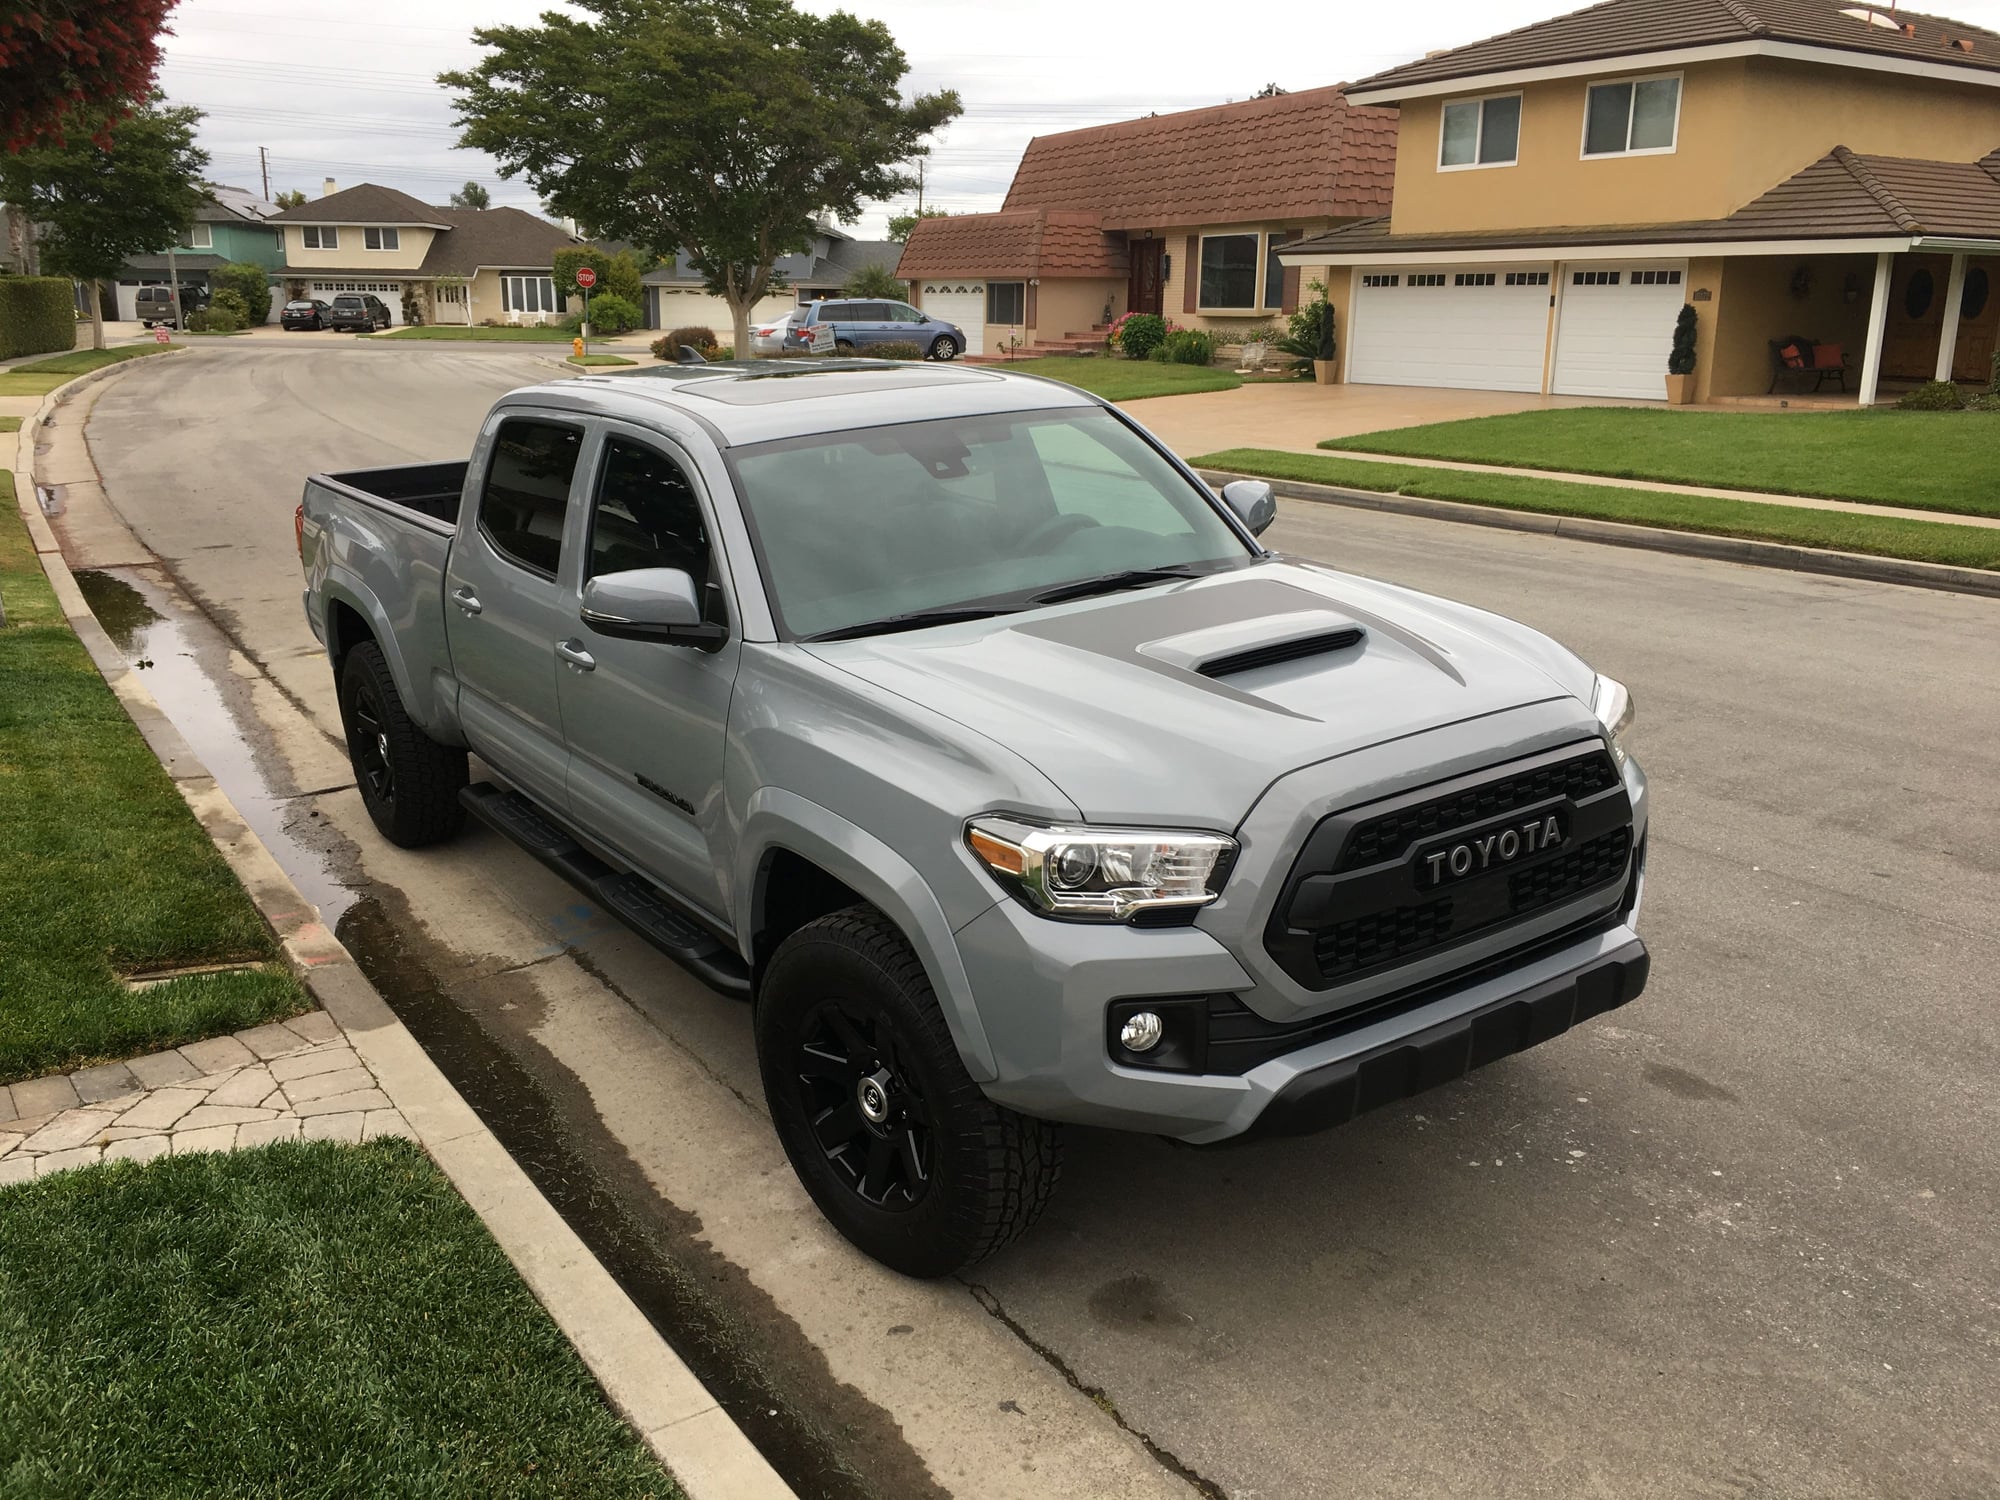 2019 Toyota Tacoma - 2019 Toyota Tacoma 4WD TRD Sport - Dbl Cab Long Bed - Loaded - $38,500 - Used - VIN 3tmdz5bn6km062869 - 3,600 Miles - 6 cyl - 4WD - Automatic - Truck - Gray - Huntington Beach, CA 92646, United States